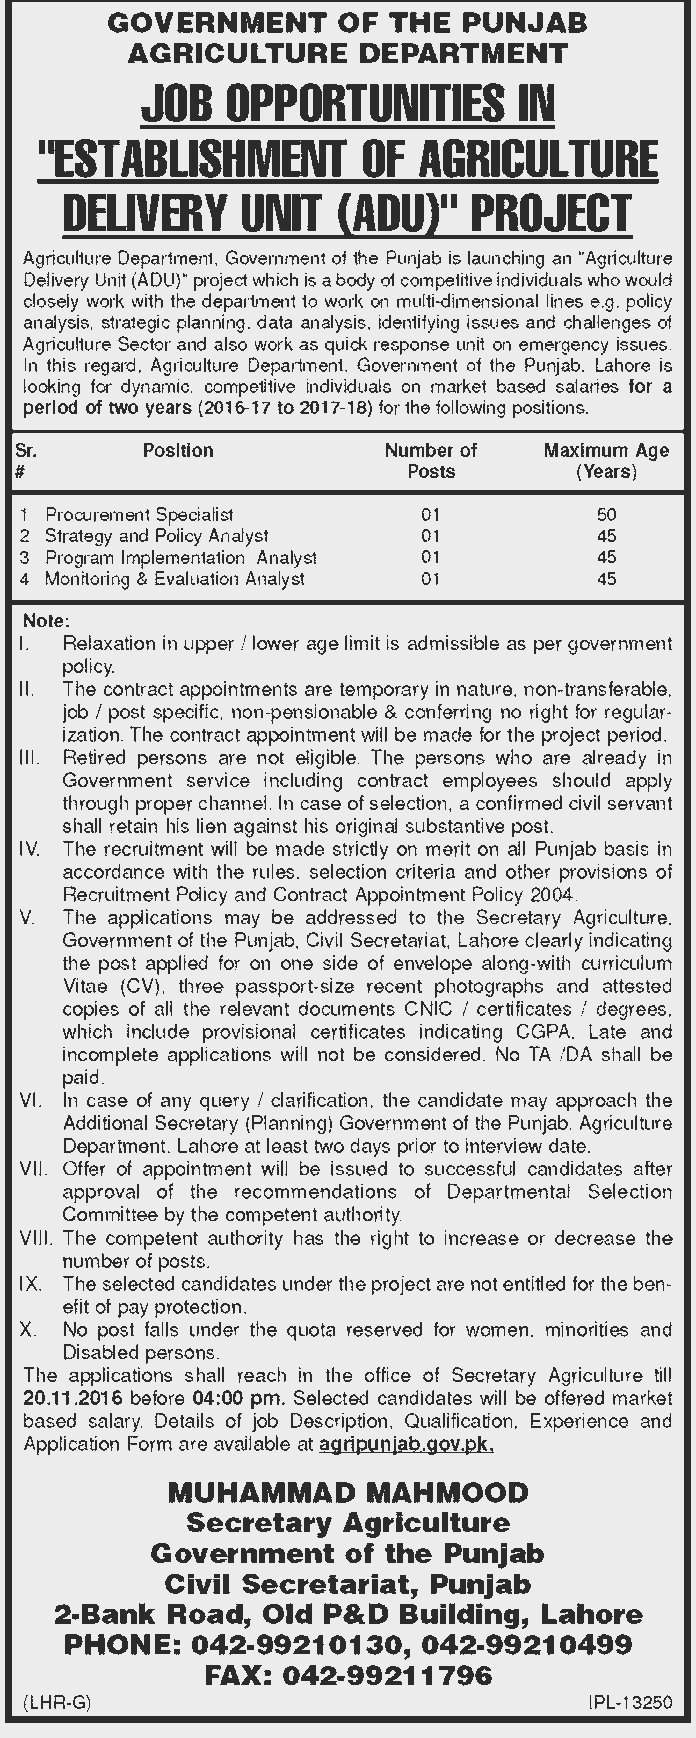 Job opportunities in Establishment of Agriculture Delivery Unit (ADU) Project